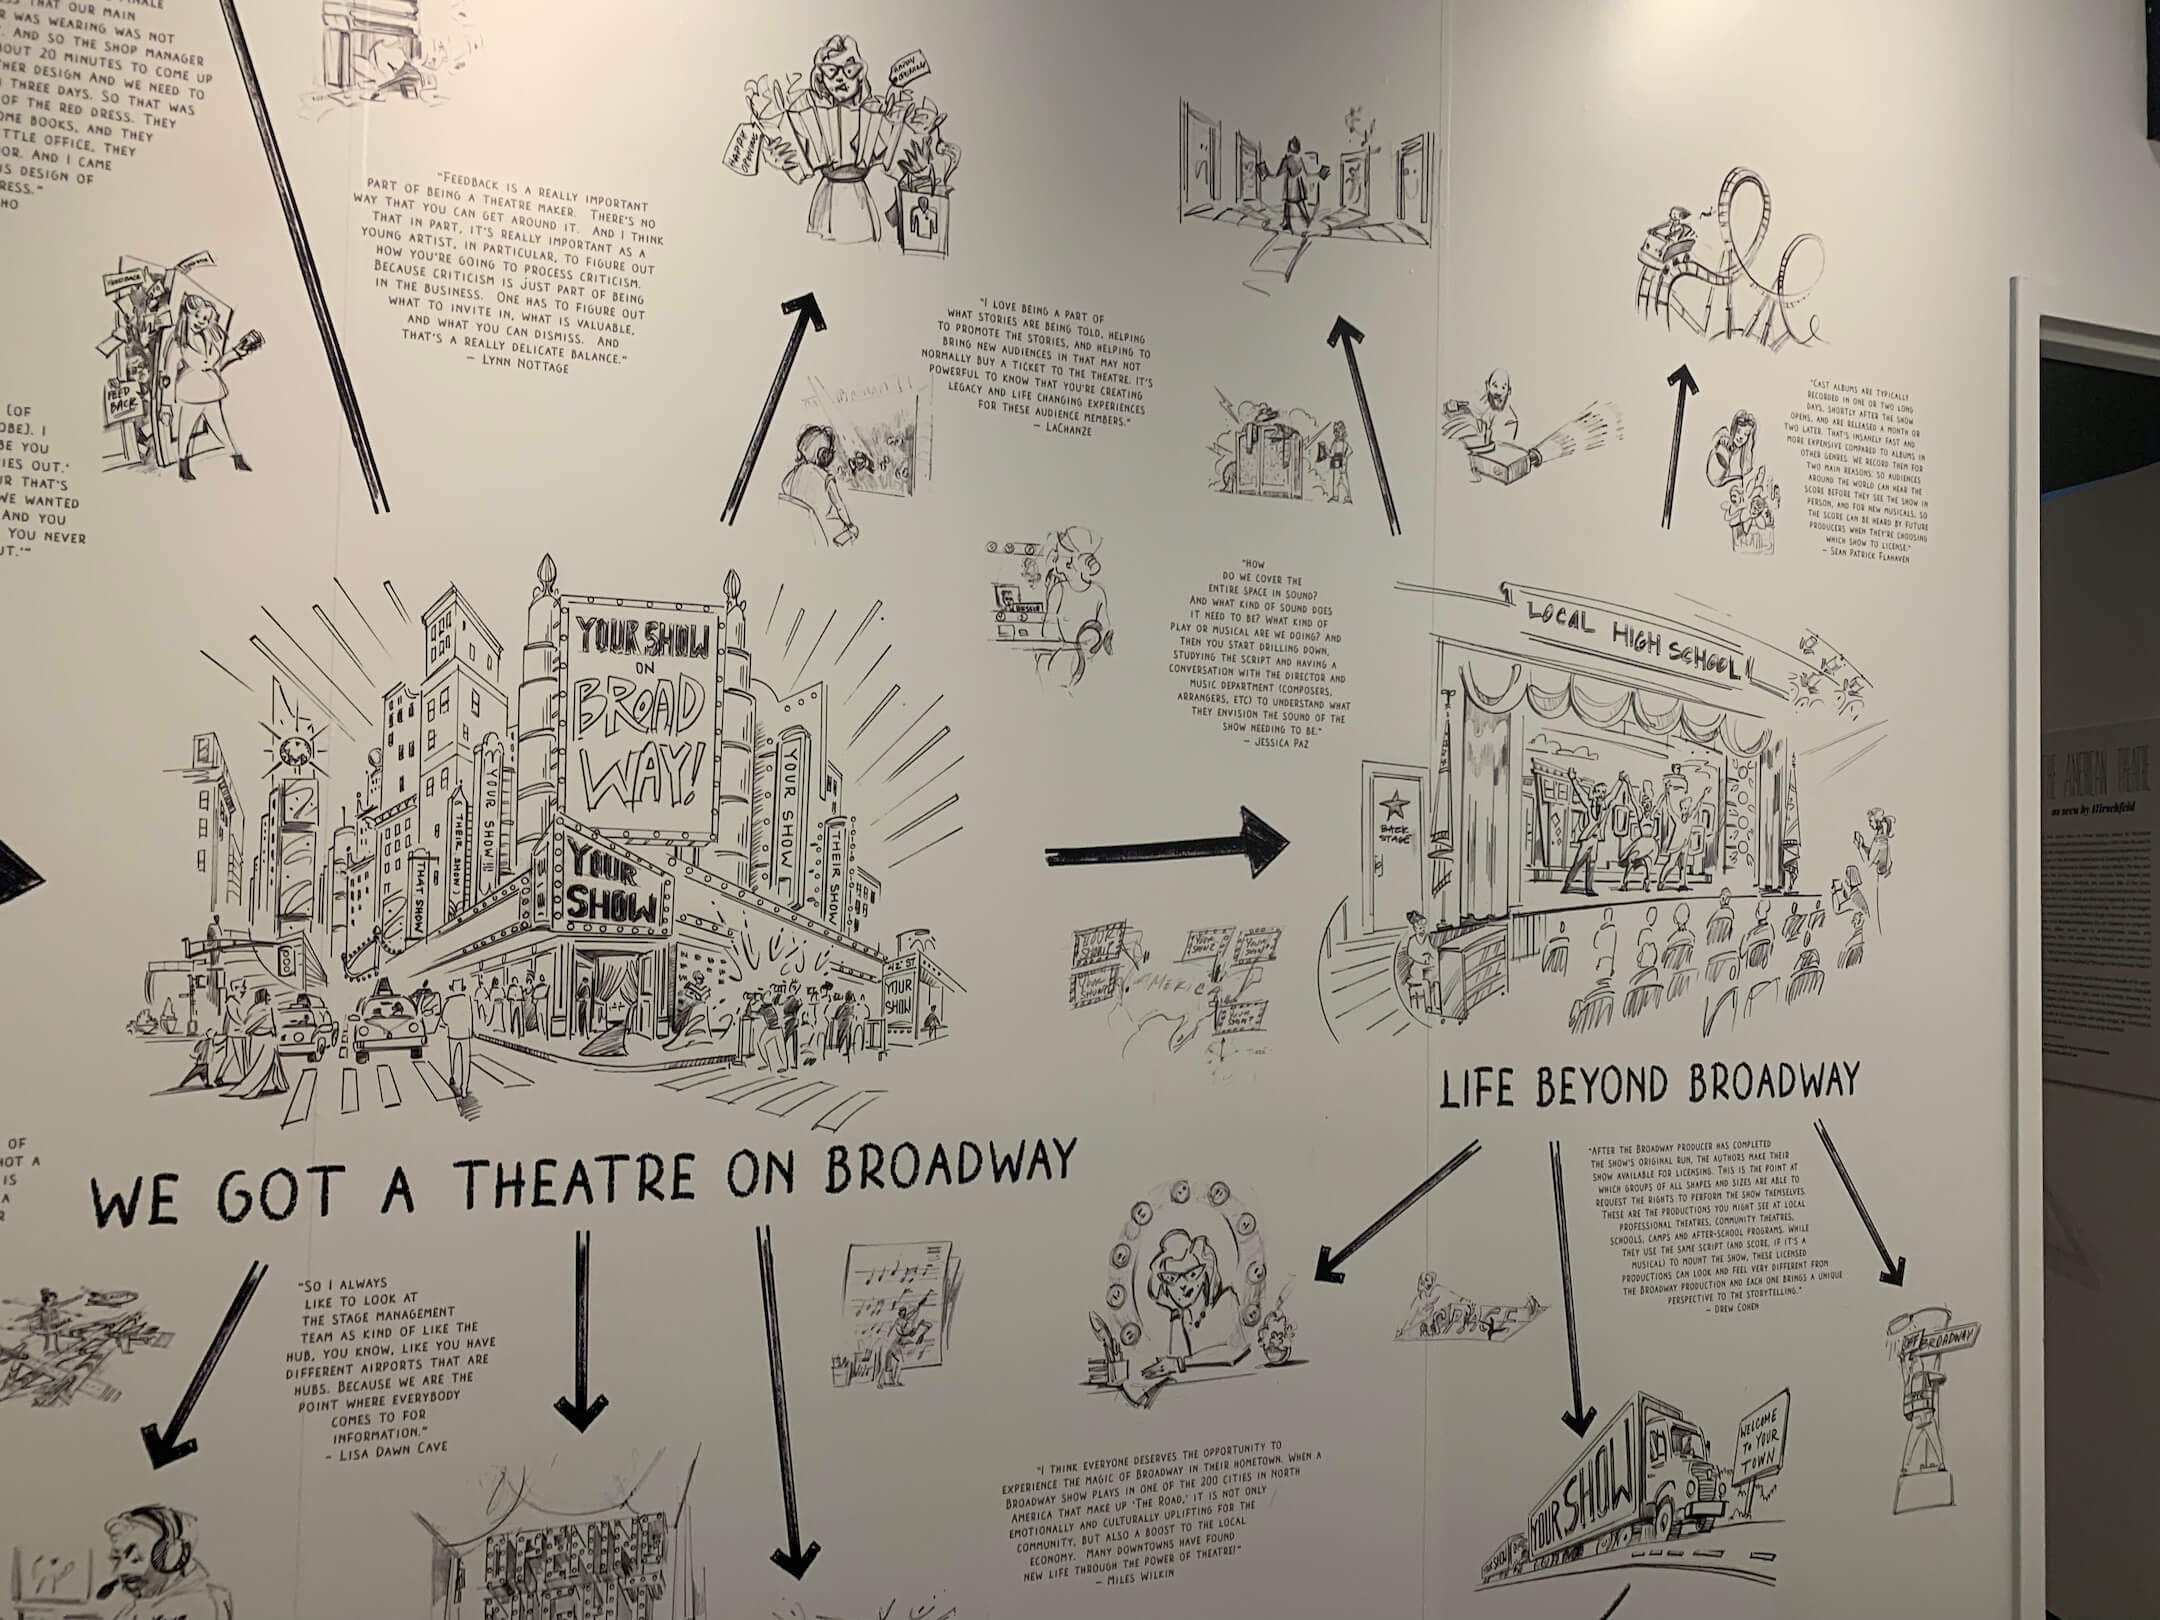  A graphic of the life cycle of a Broadway show covers the walls (Part 3) 